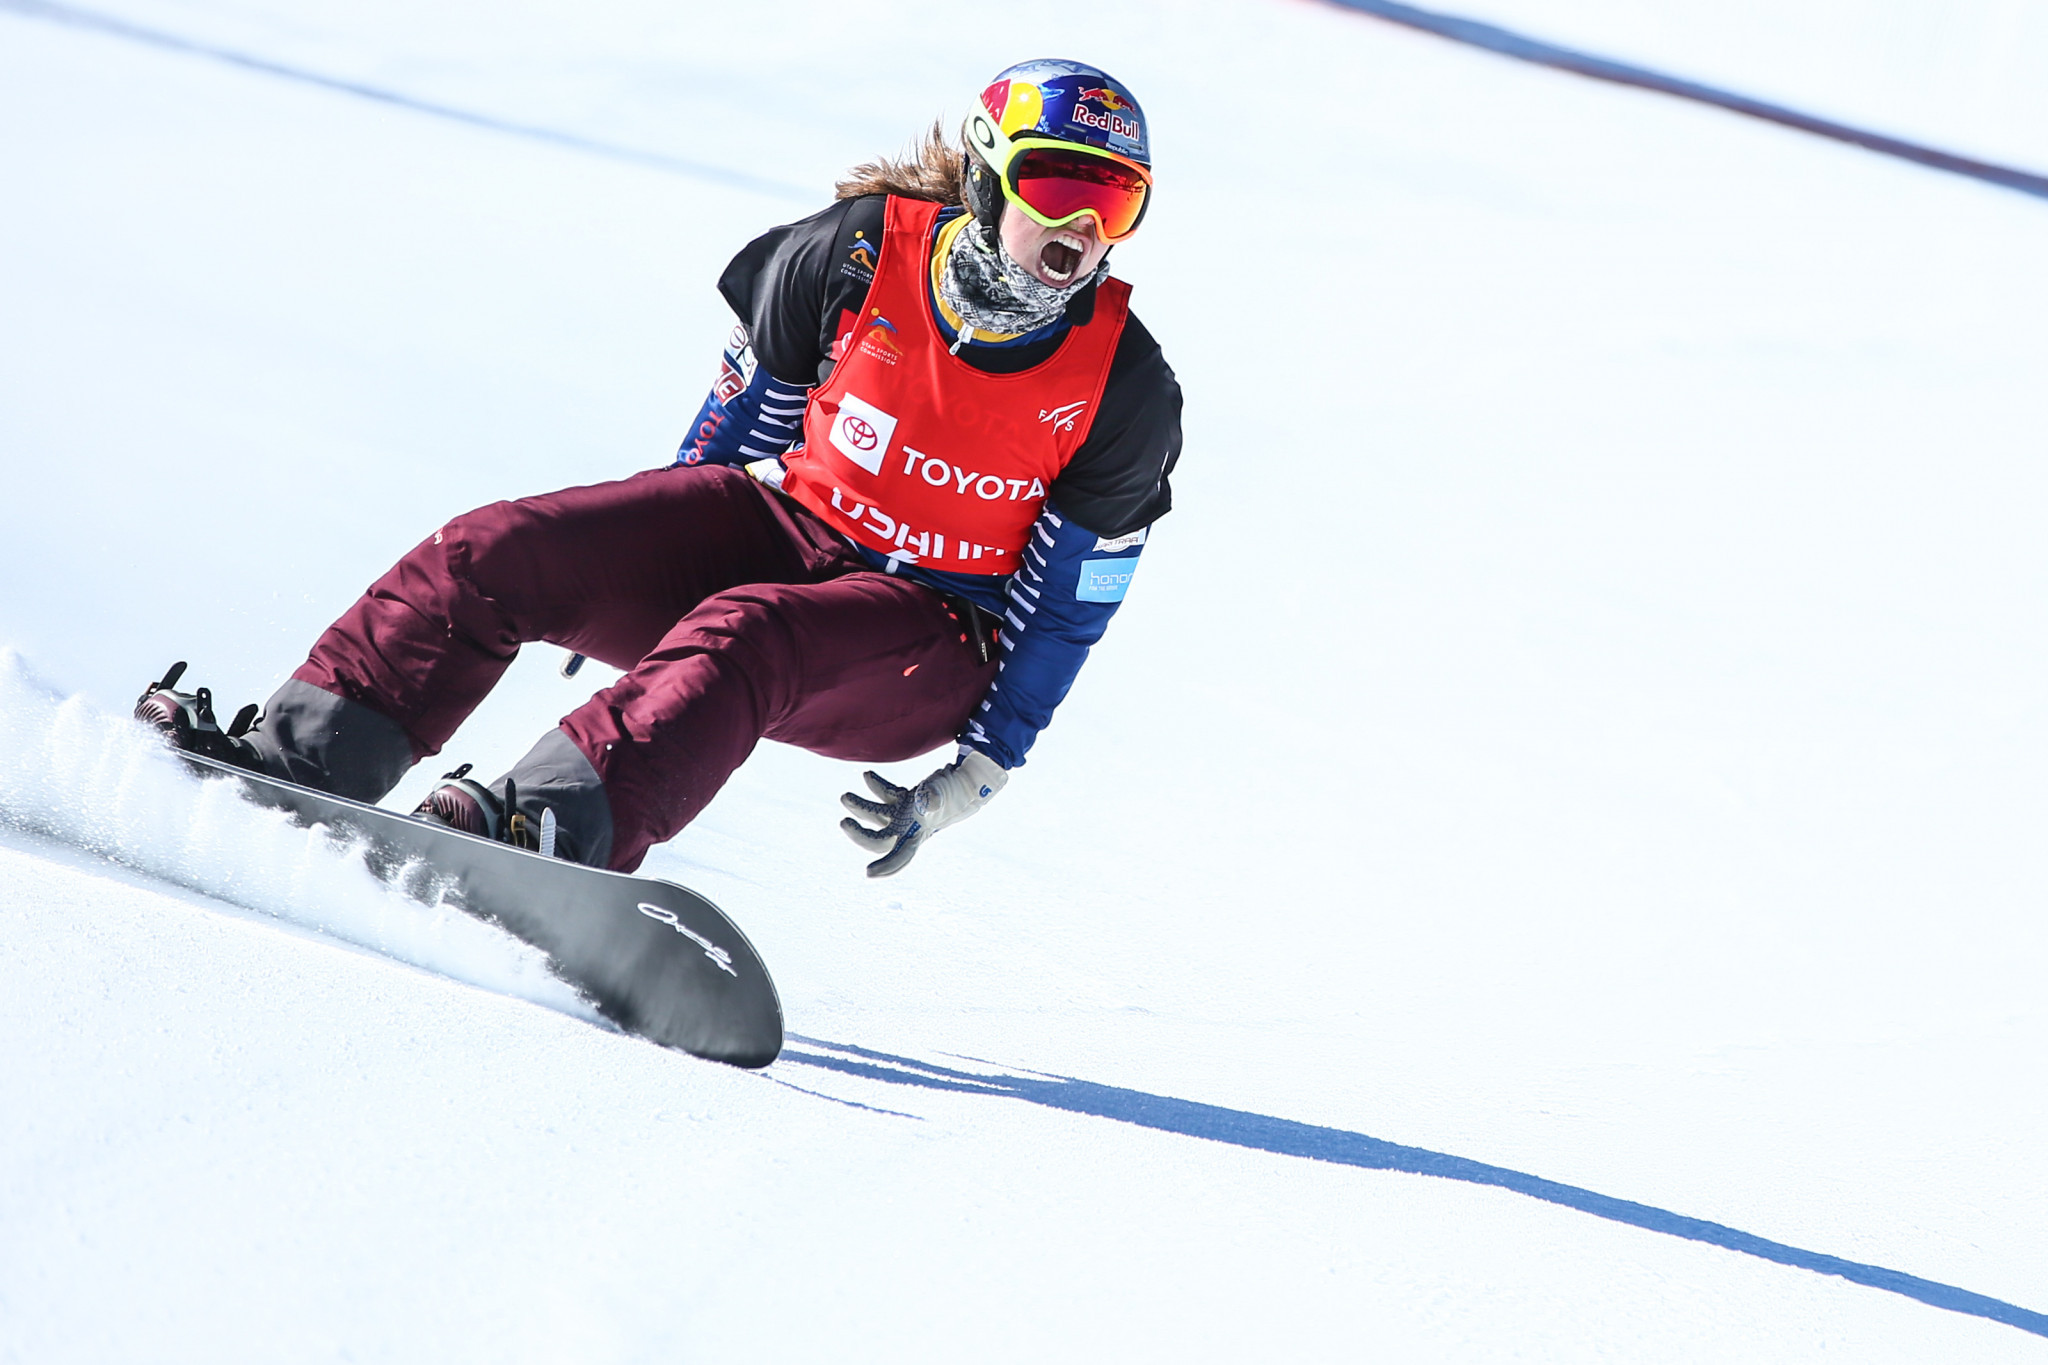 Samková wins in Spain to draw level with Jacobellis in race for overall FIS Snowboard Cross World Cup title